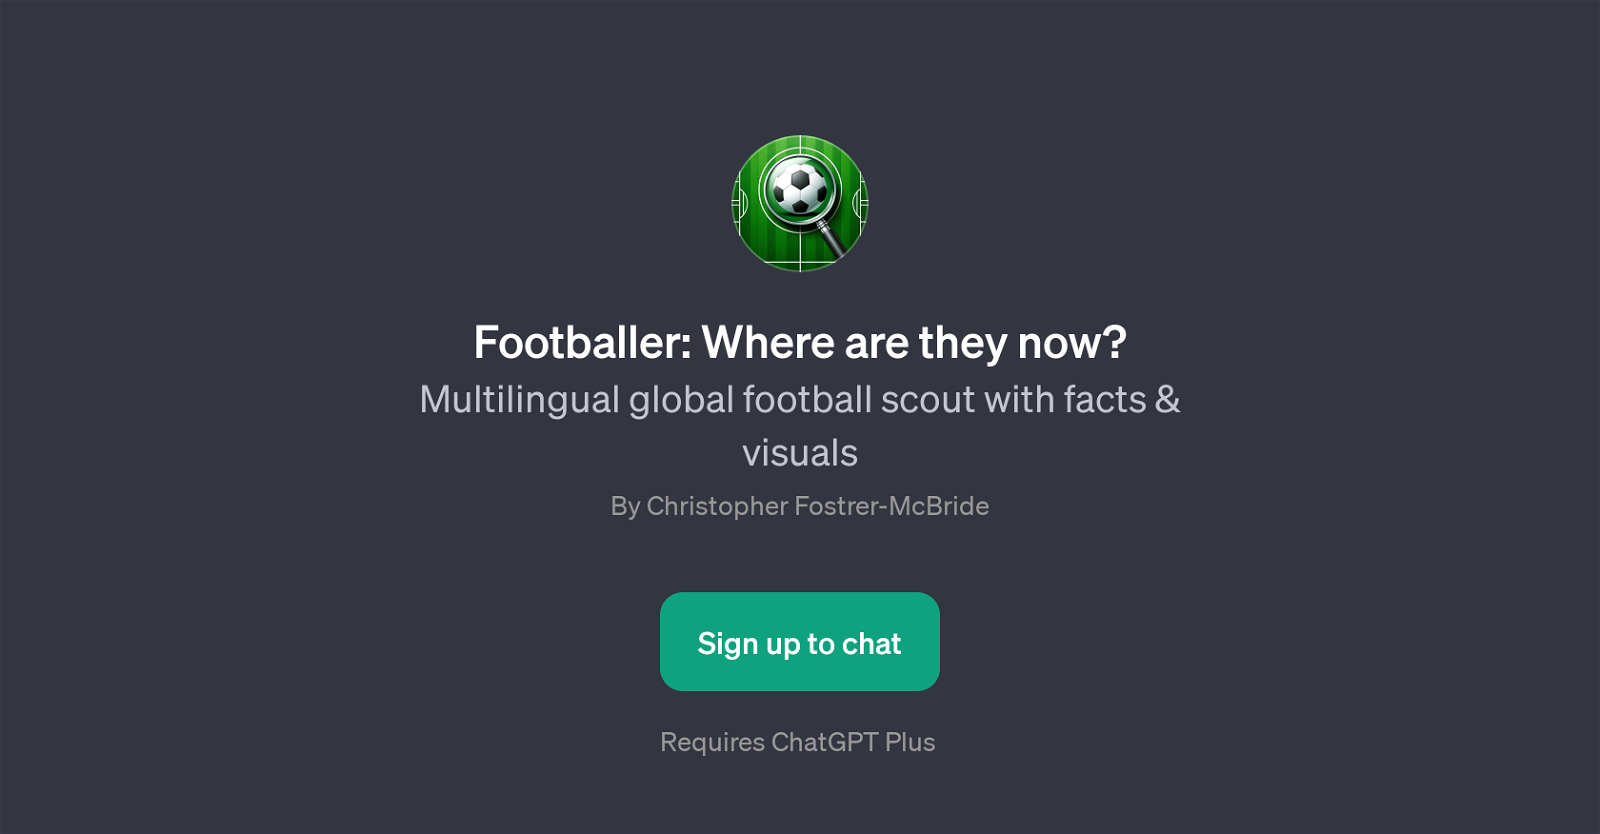 Footballer: Where are they now? website